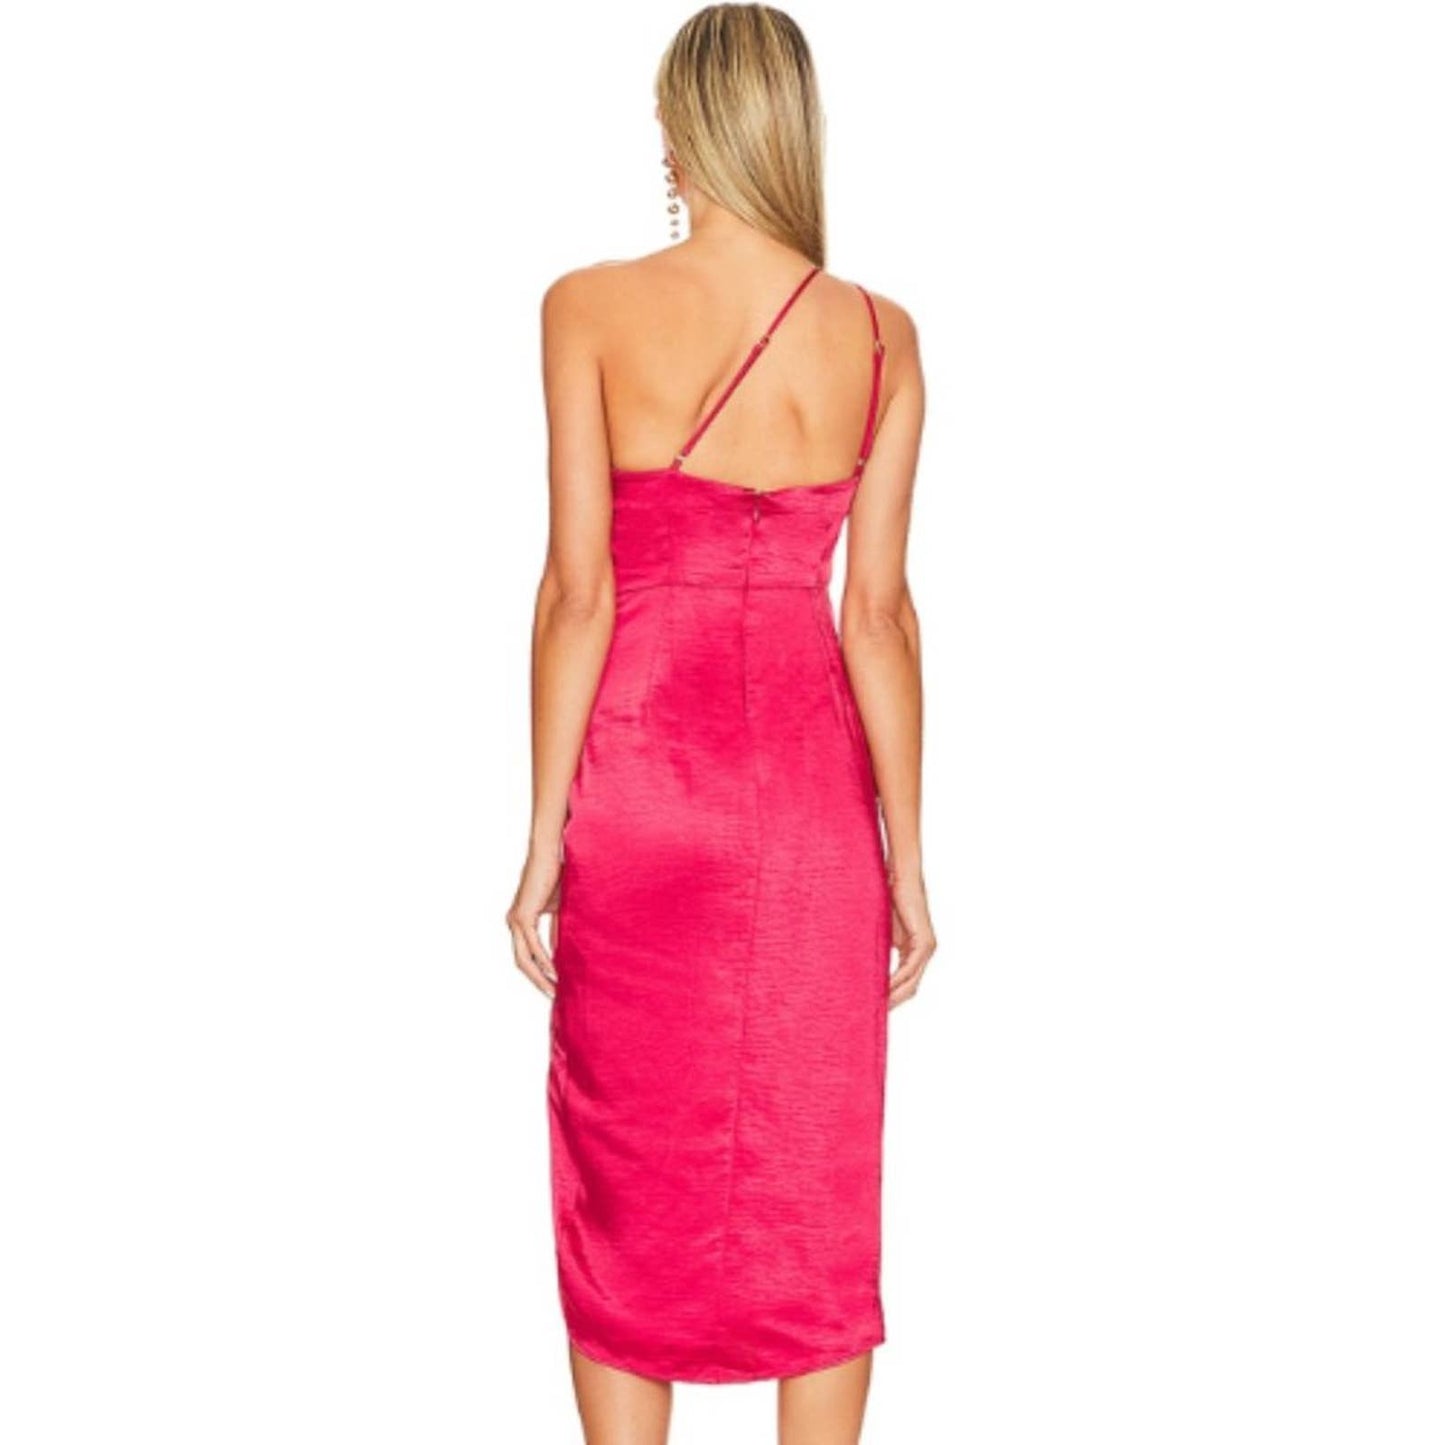 Lovers and Friends Renata Midi Dress in Cherry Red NWT Size XS